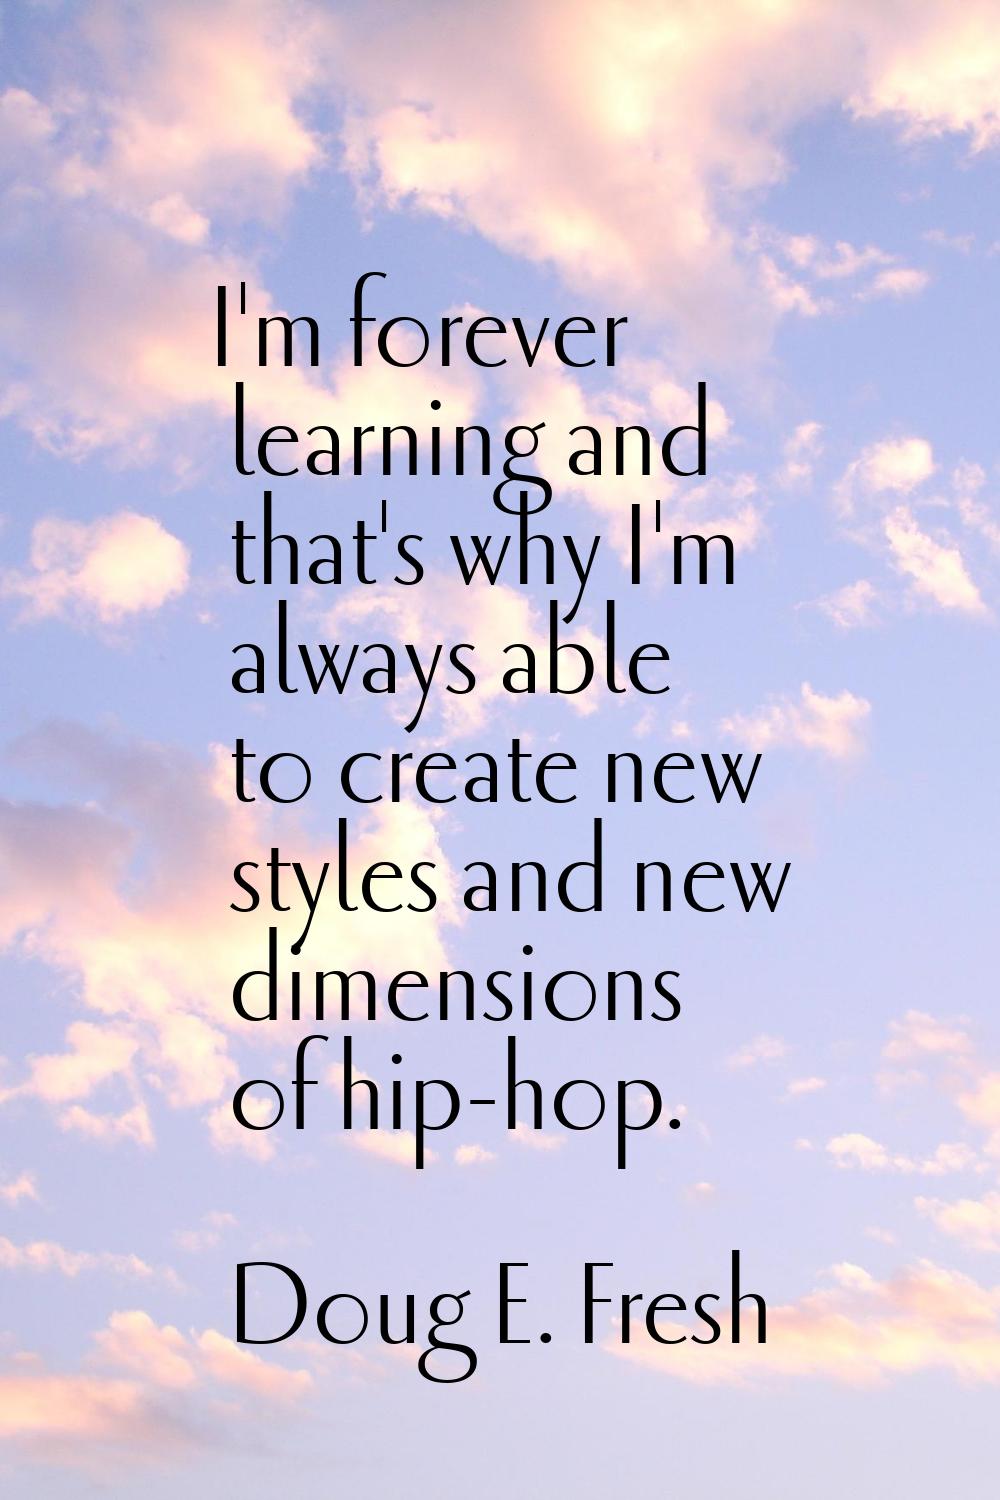 I'm forever learning and that's why I'm always able to create new styles and new dimensions of hip-